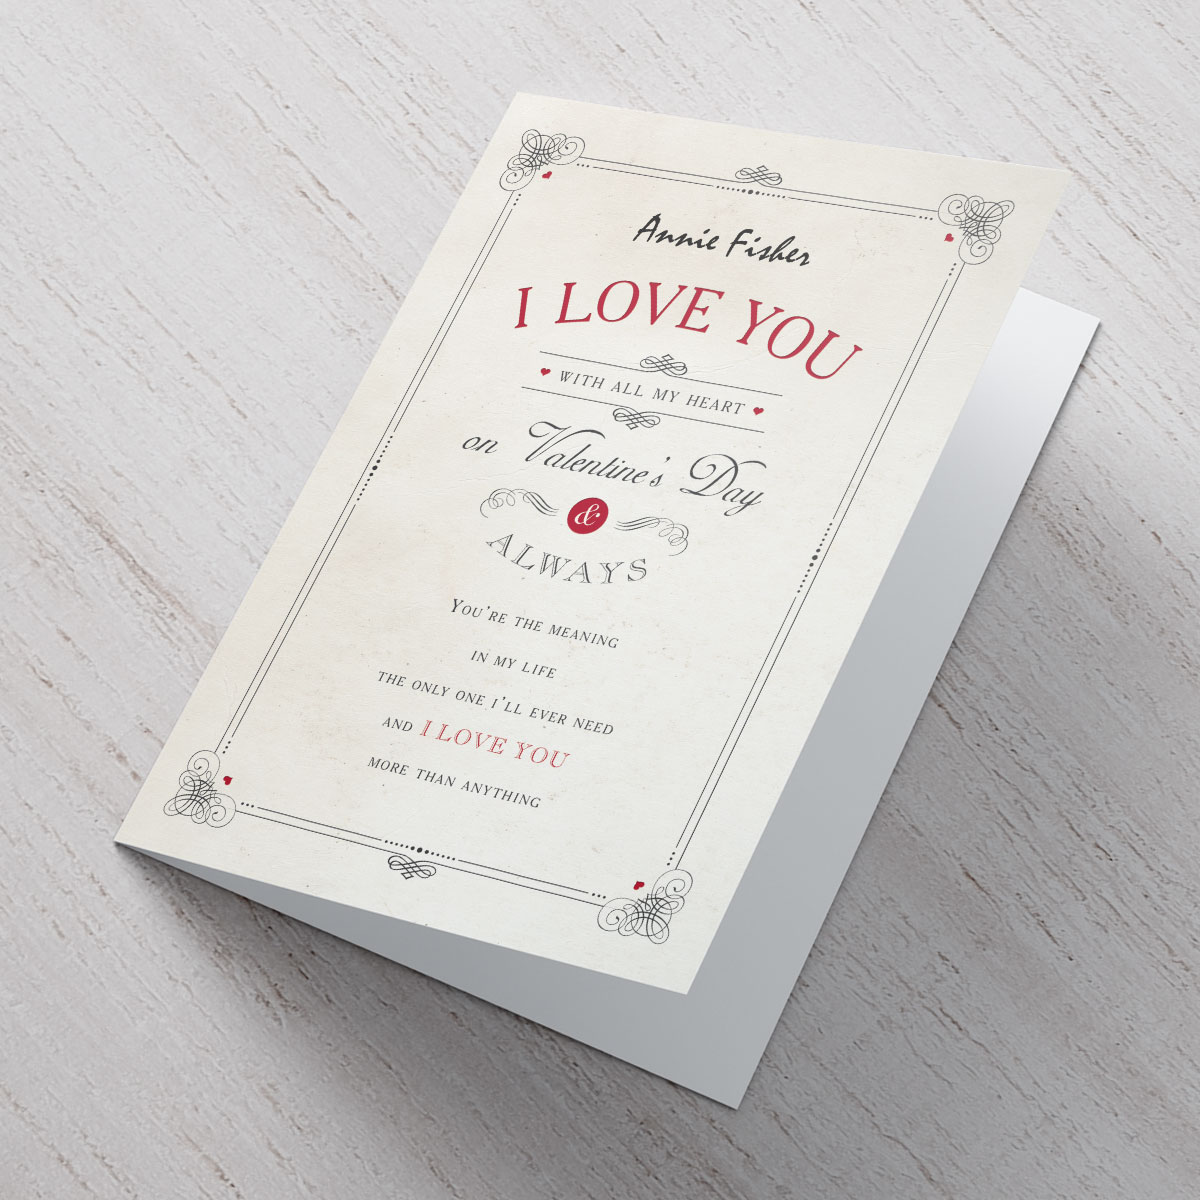 Personalised Valentine's Card - I Love You With All My Heart